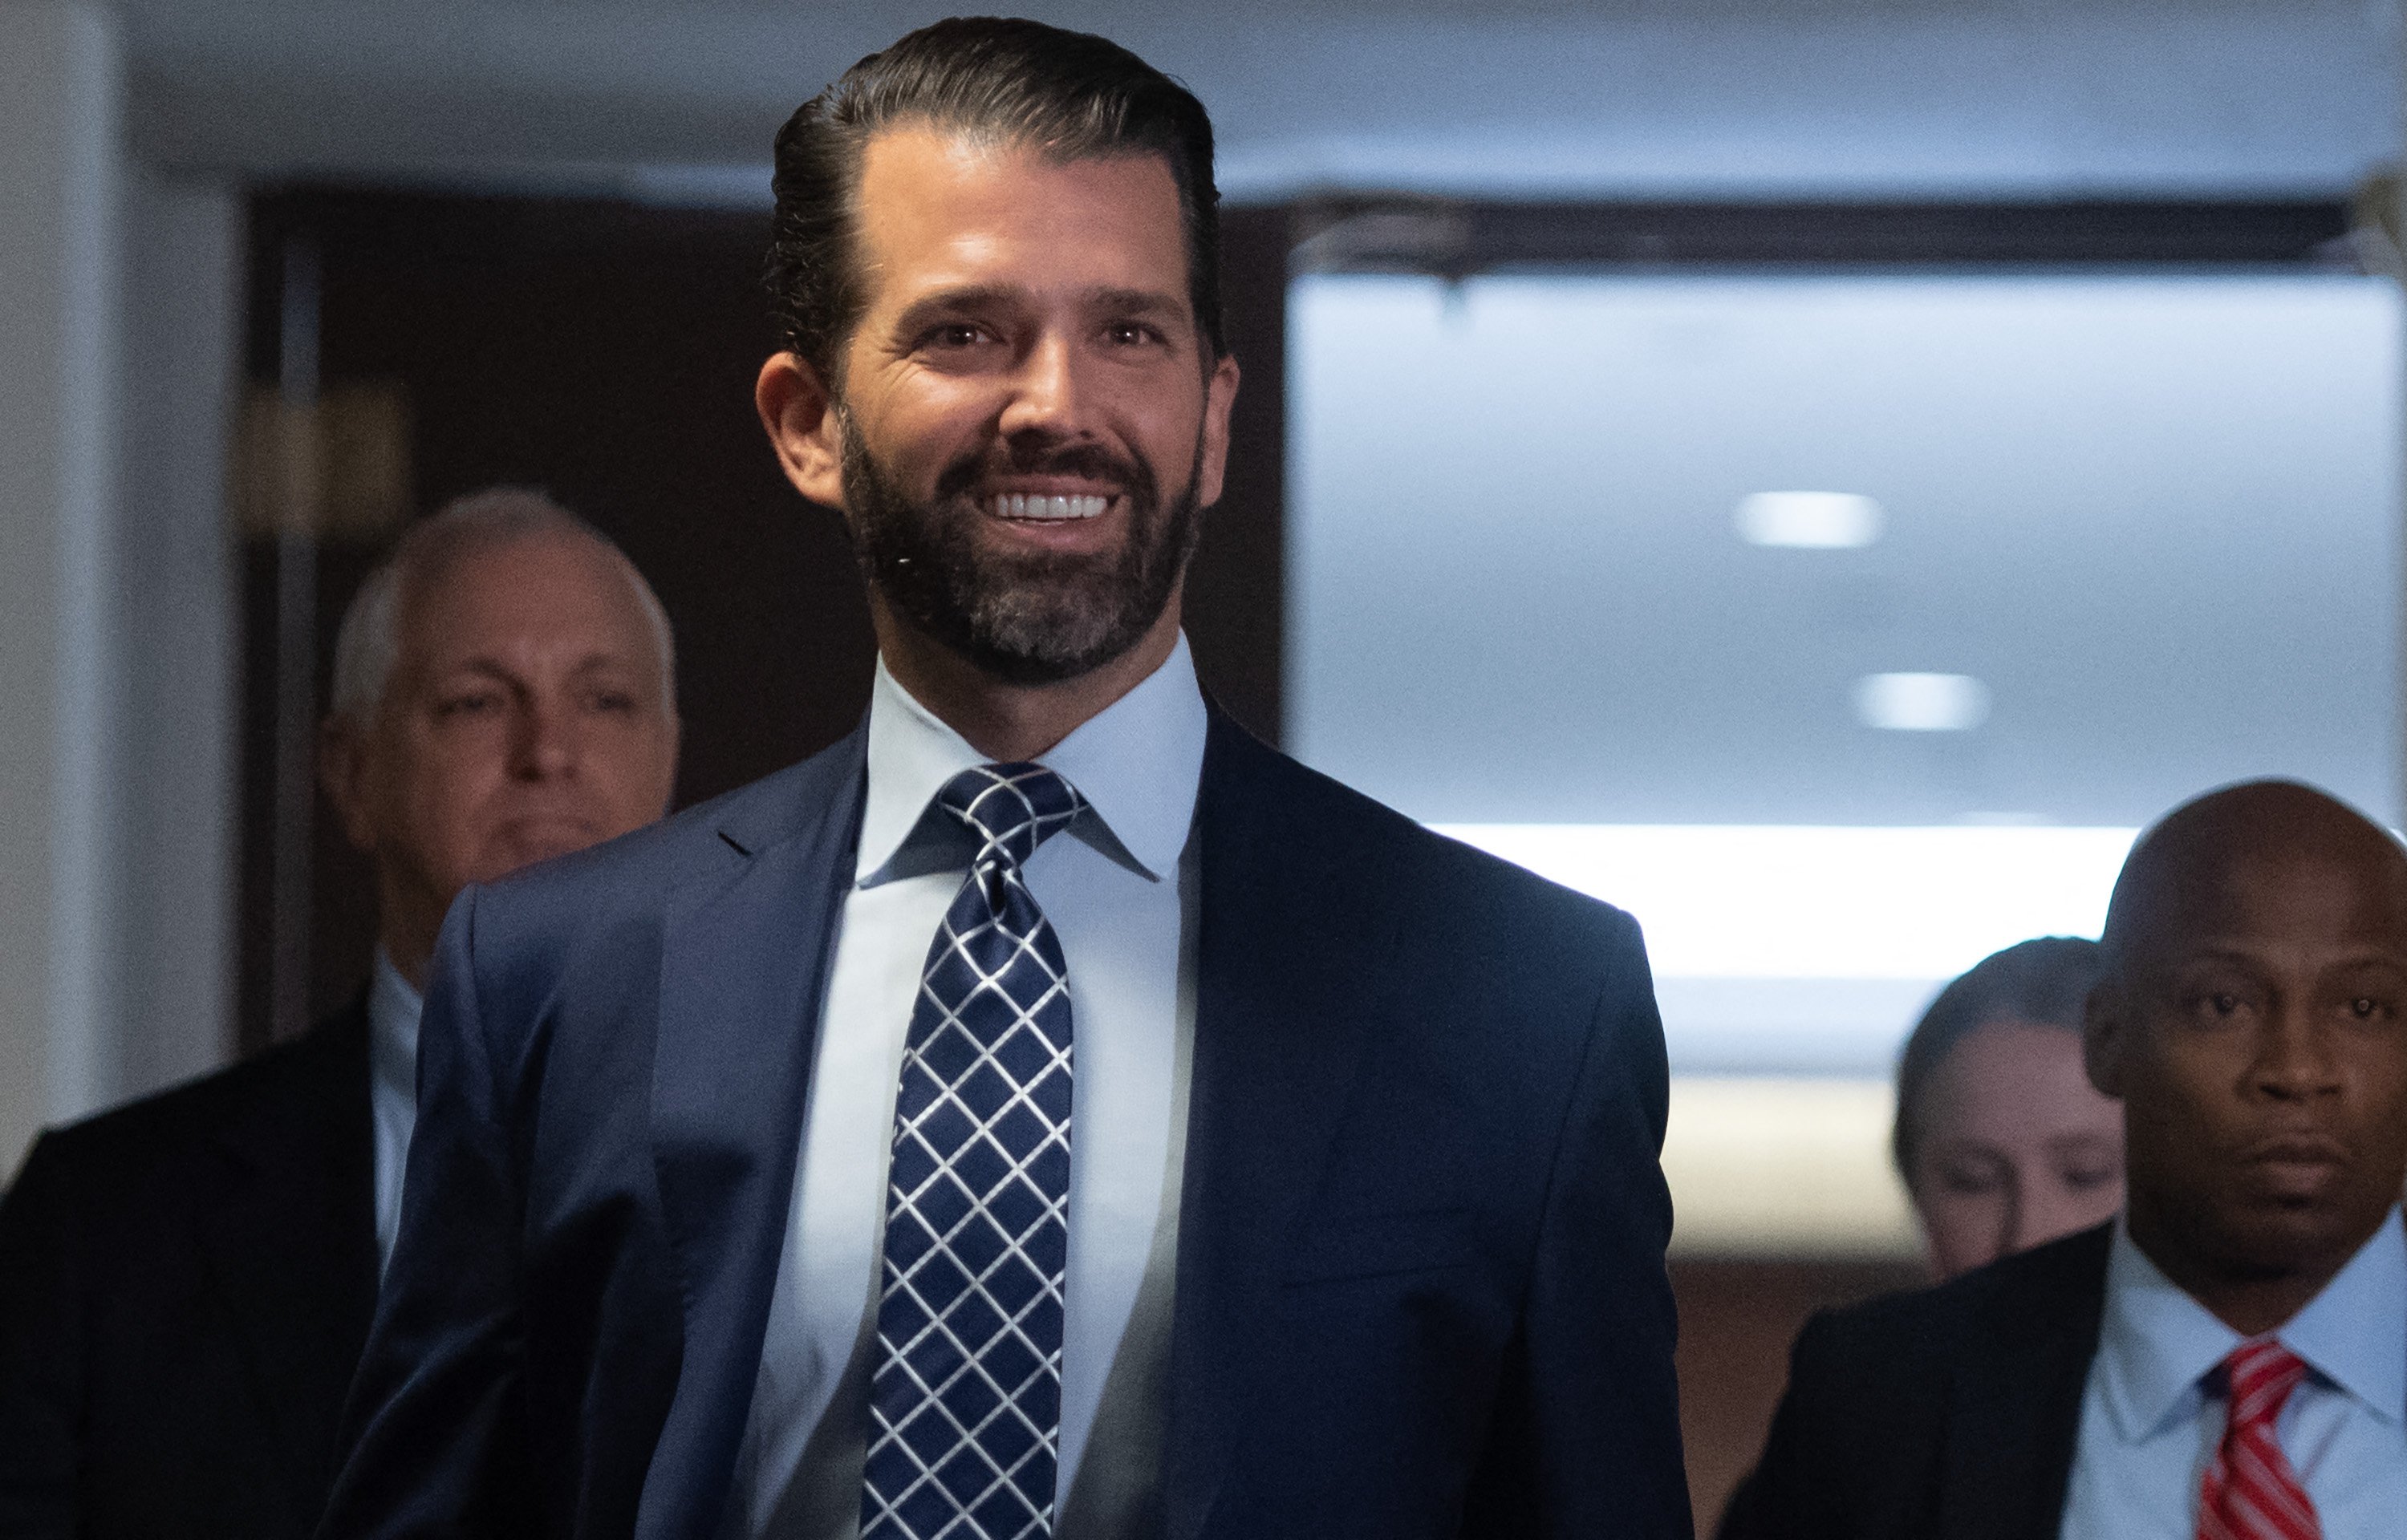 Donald Trump, Jr., arrives to testify before the US Senate Select Committee on Intelligence on Capitol Hill in Washington, DC, June 12, 2019. | Source: Getty Images